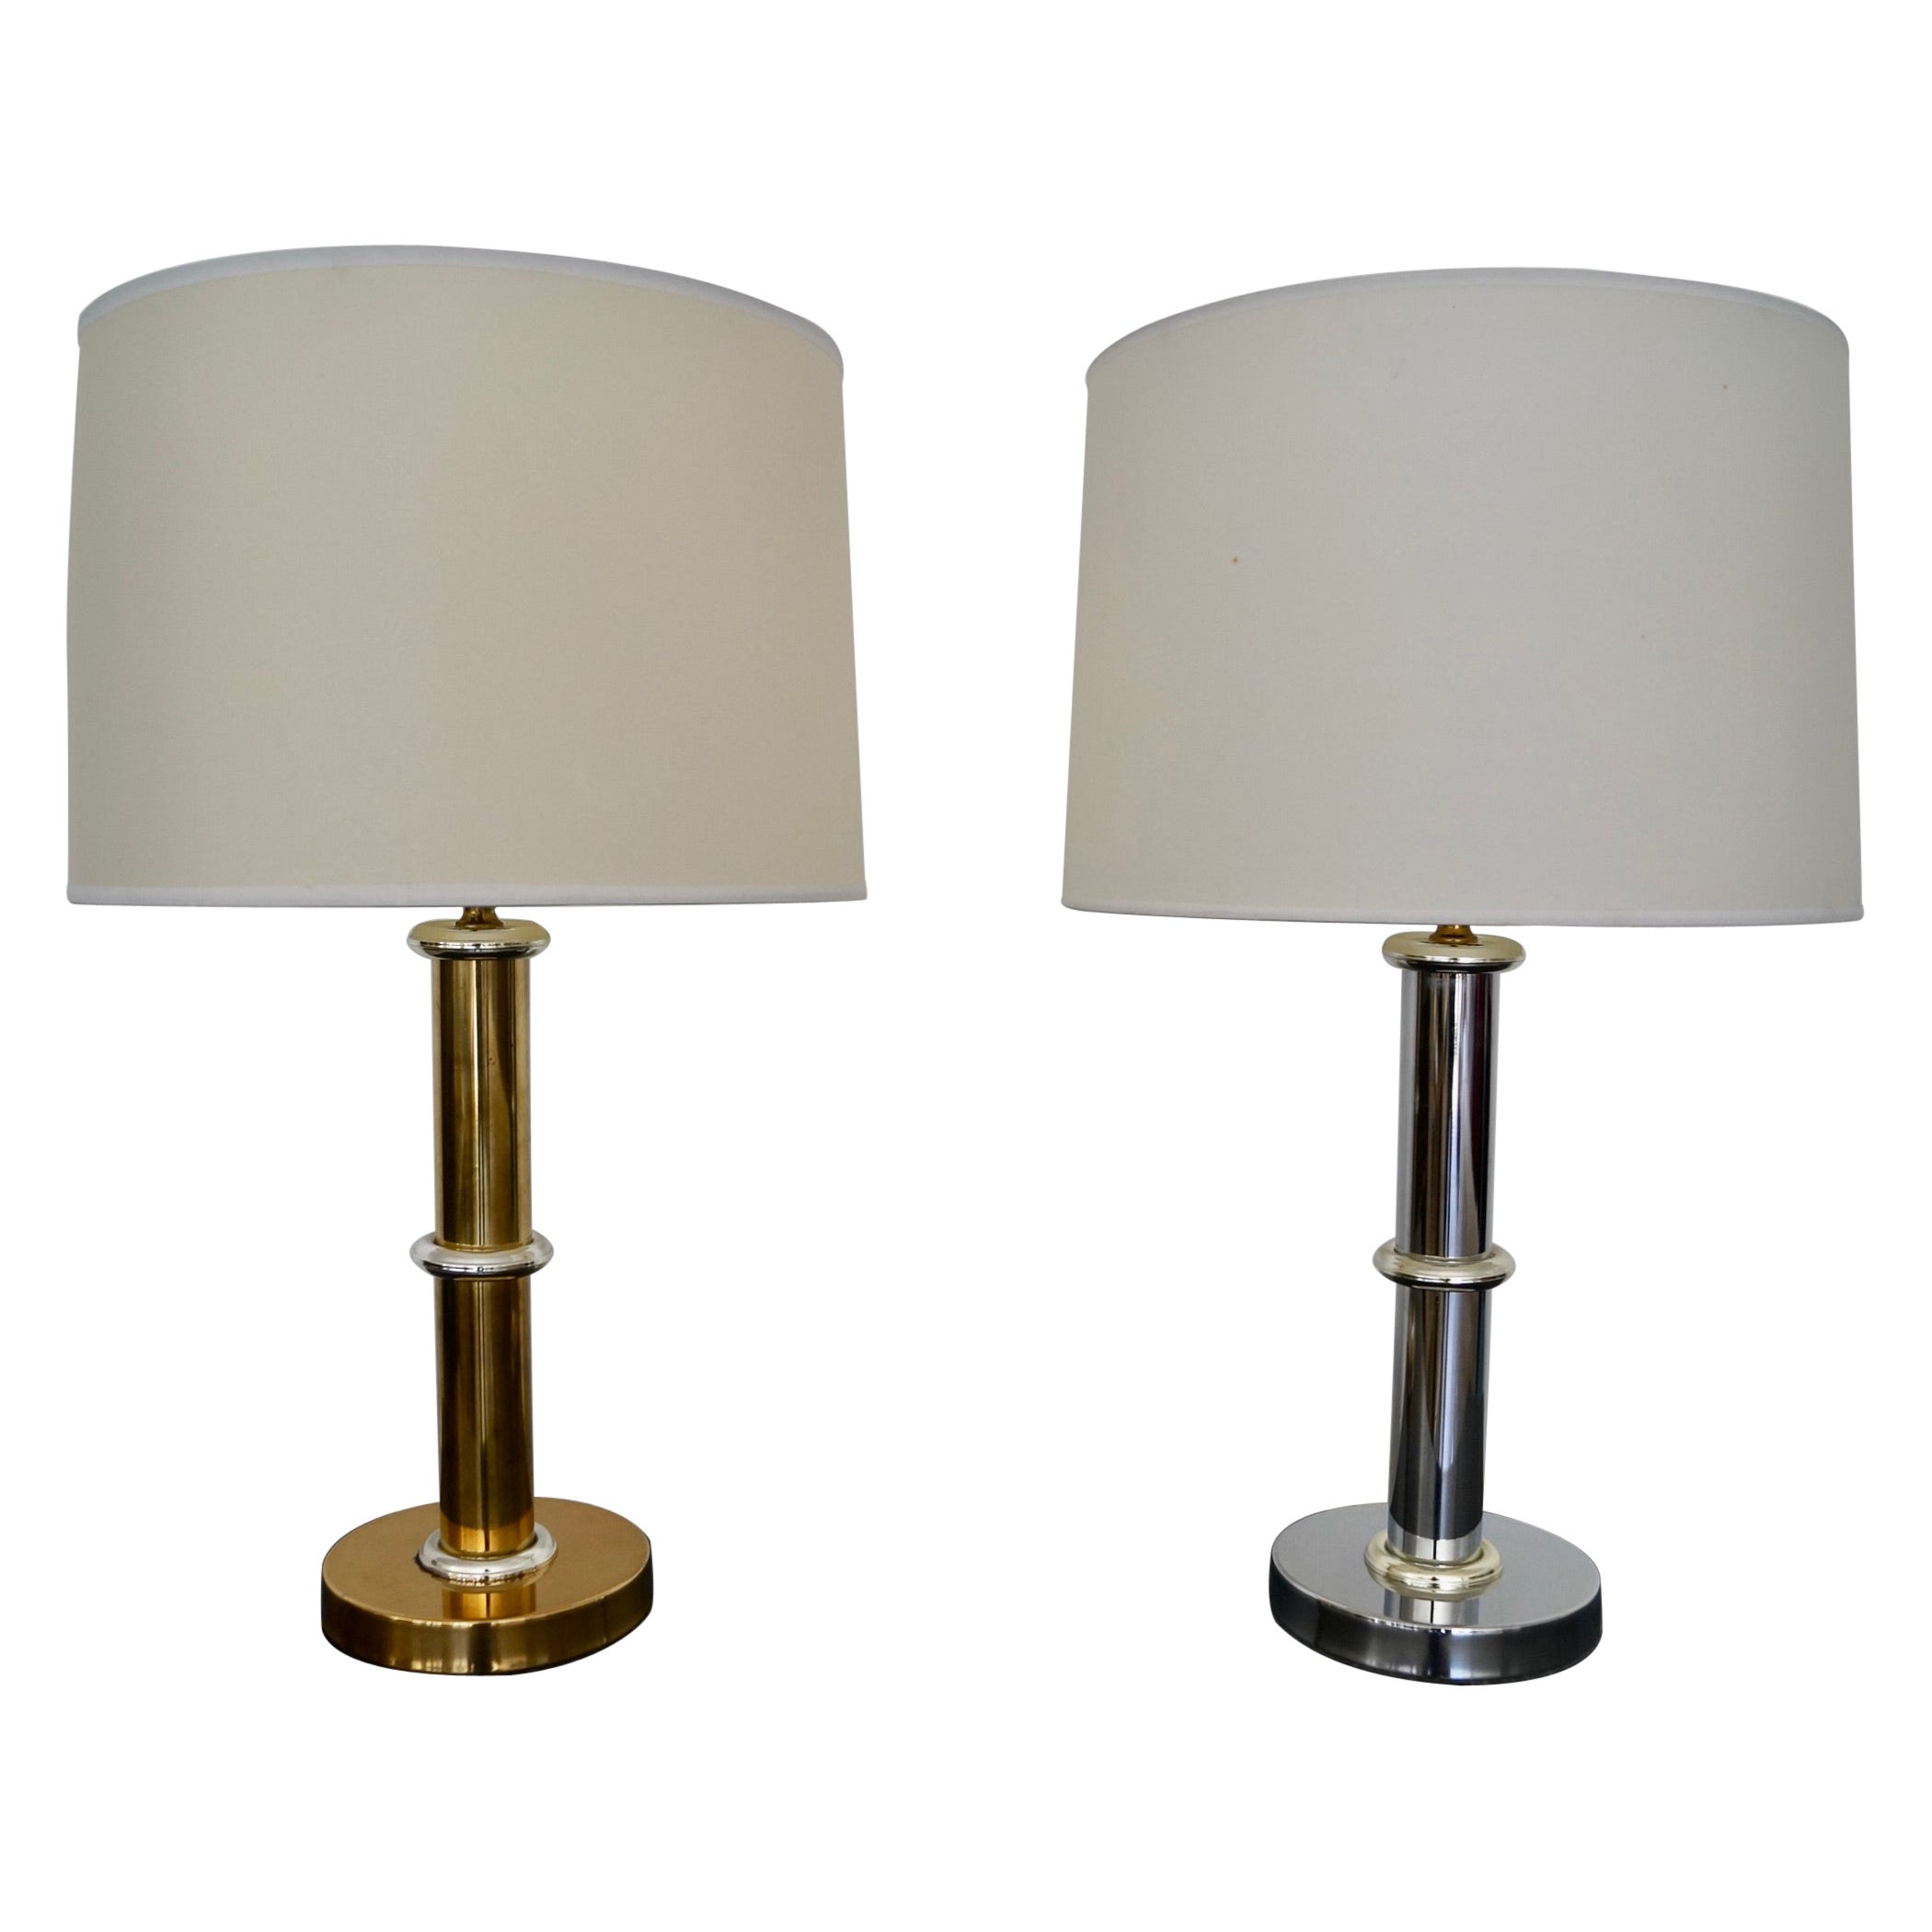 Pair of Mid-Century Modern Brass & Chrome Table Lamps For Sale